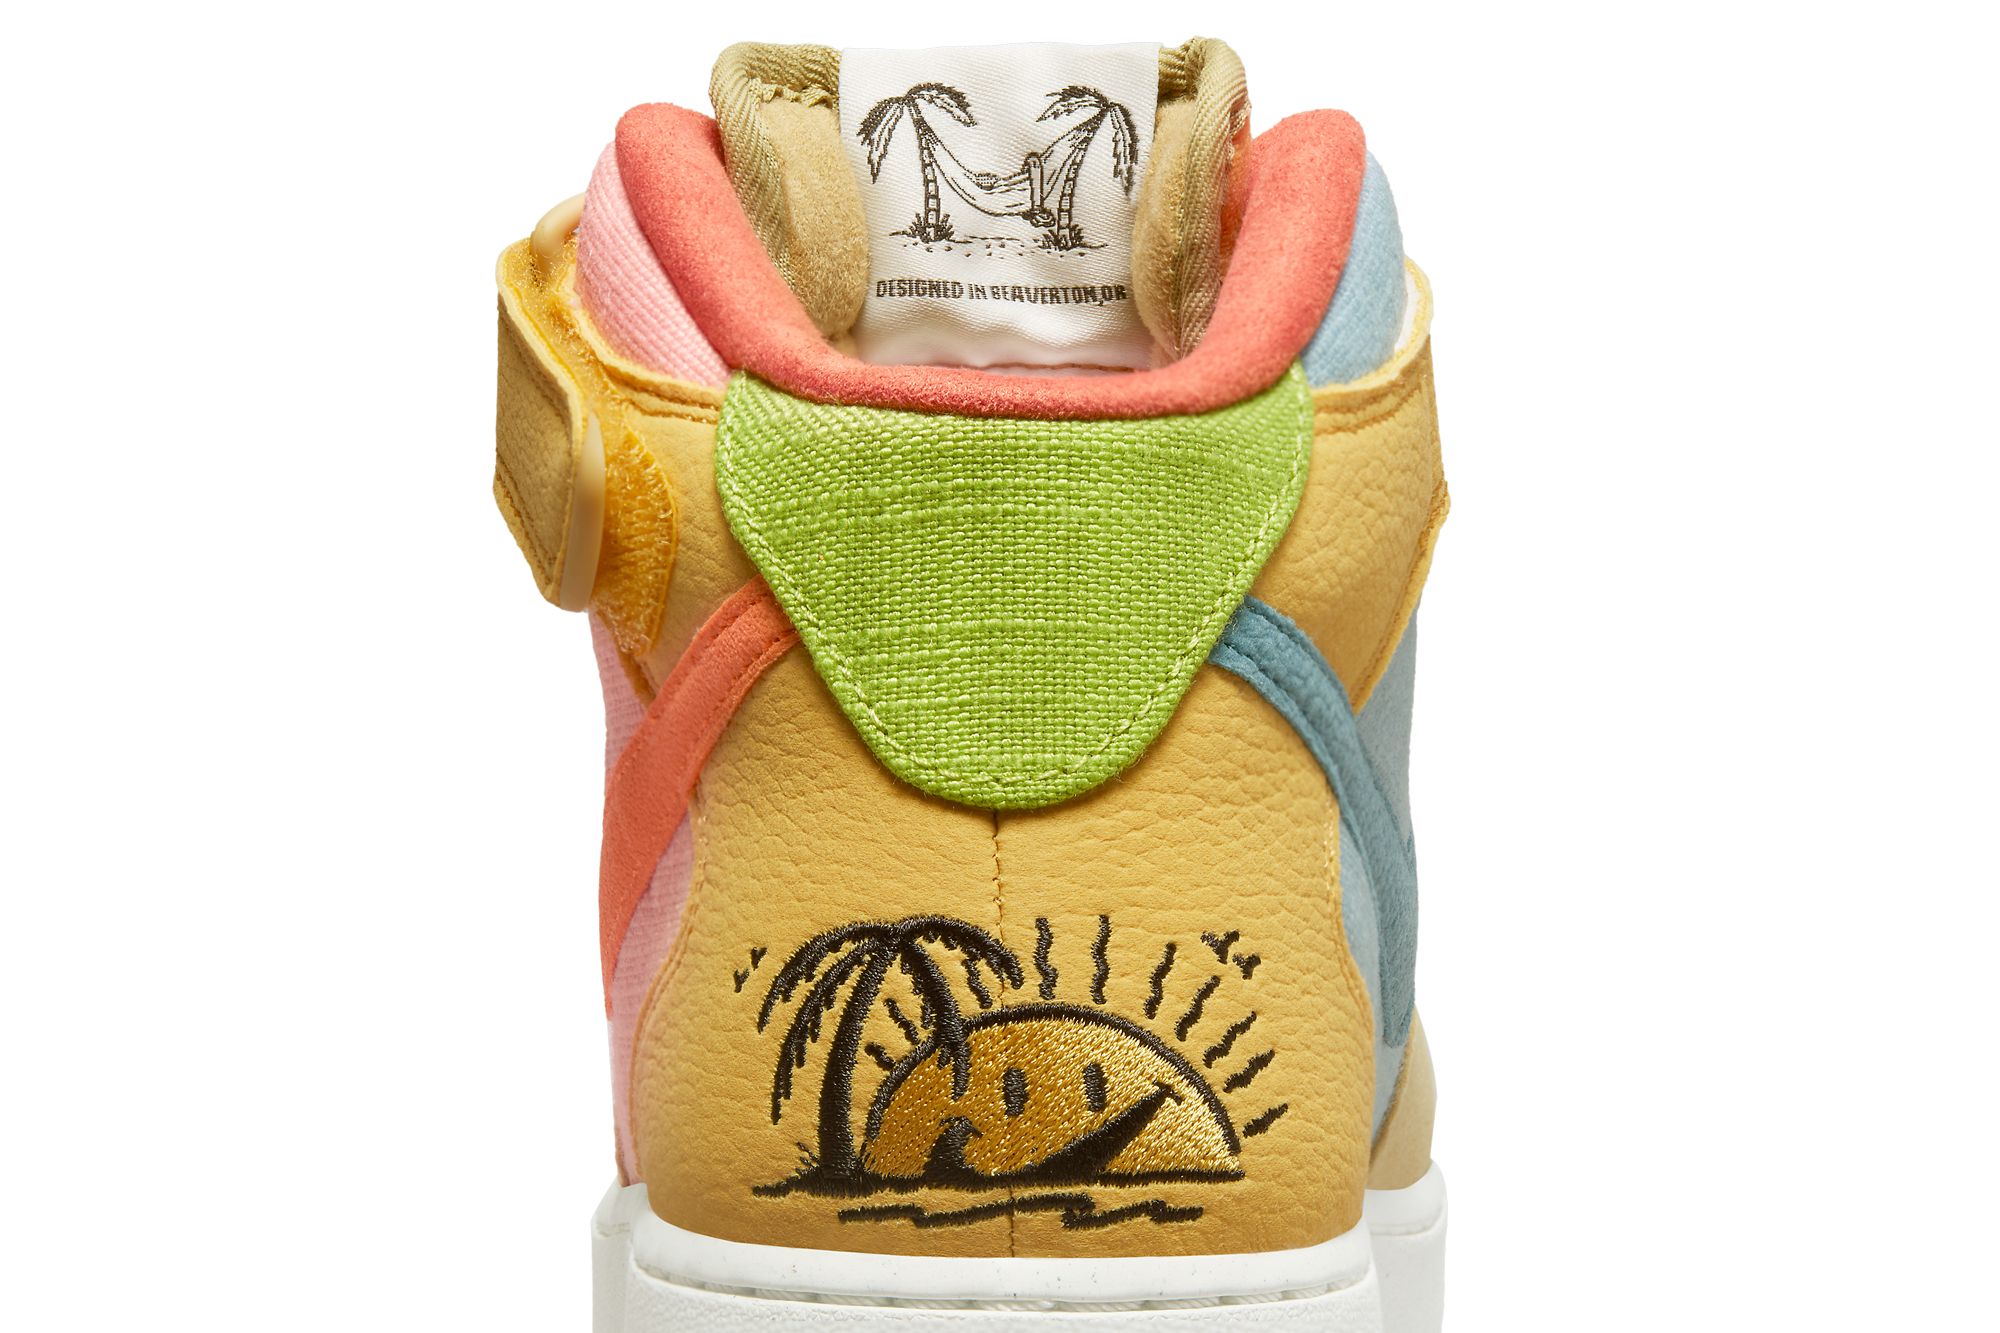 Nike Air Force 1 LV8 Next Nature “Sun Club” (GS) A LEGEND TAKES A HOLIDAY.  This AF1 brings beach-day feels to a b-ball icon. This…